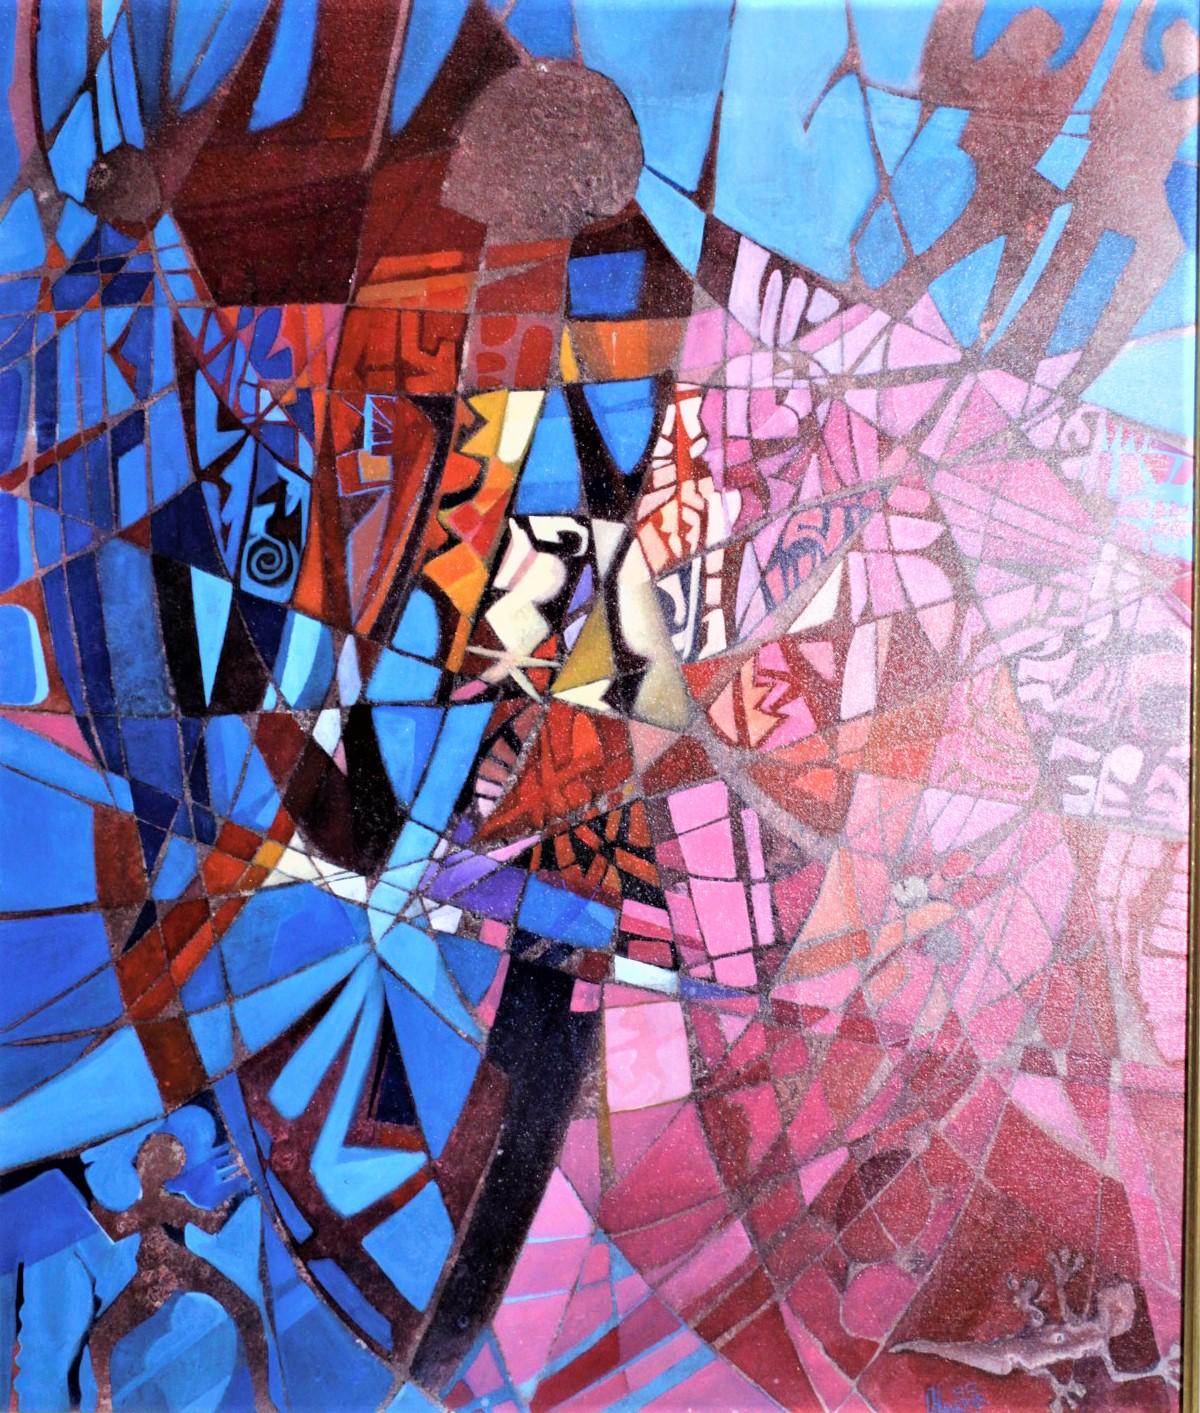 This large and well executed abstract painting was done by Carlisle Ainsworth Harris of Trinidad in 1990. This original painting is a framed acrylic on canvas and highlights Harris's signature use of vibrant color, in this case blues and reds, in a